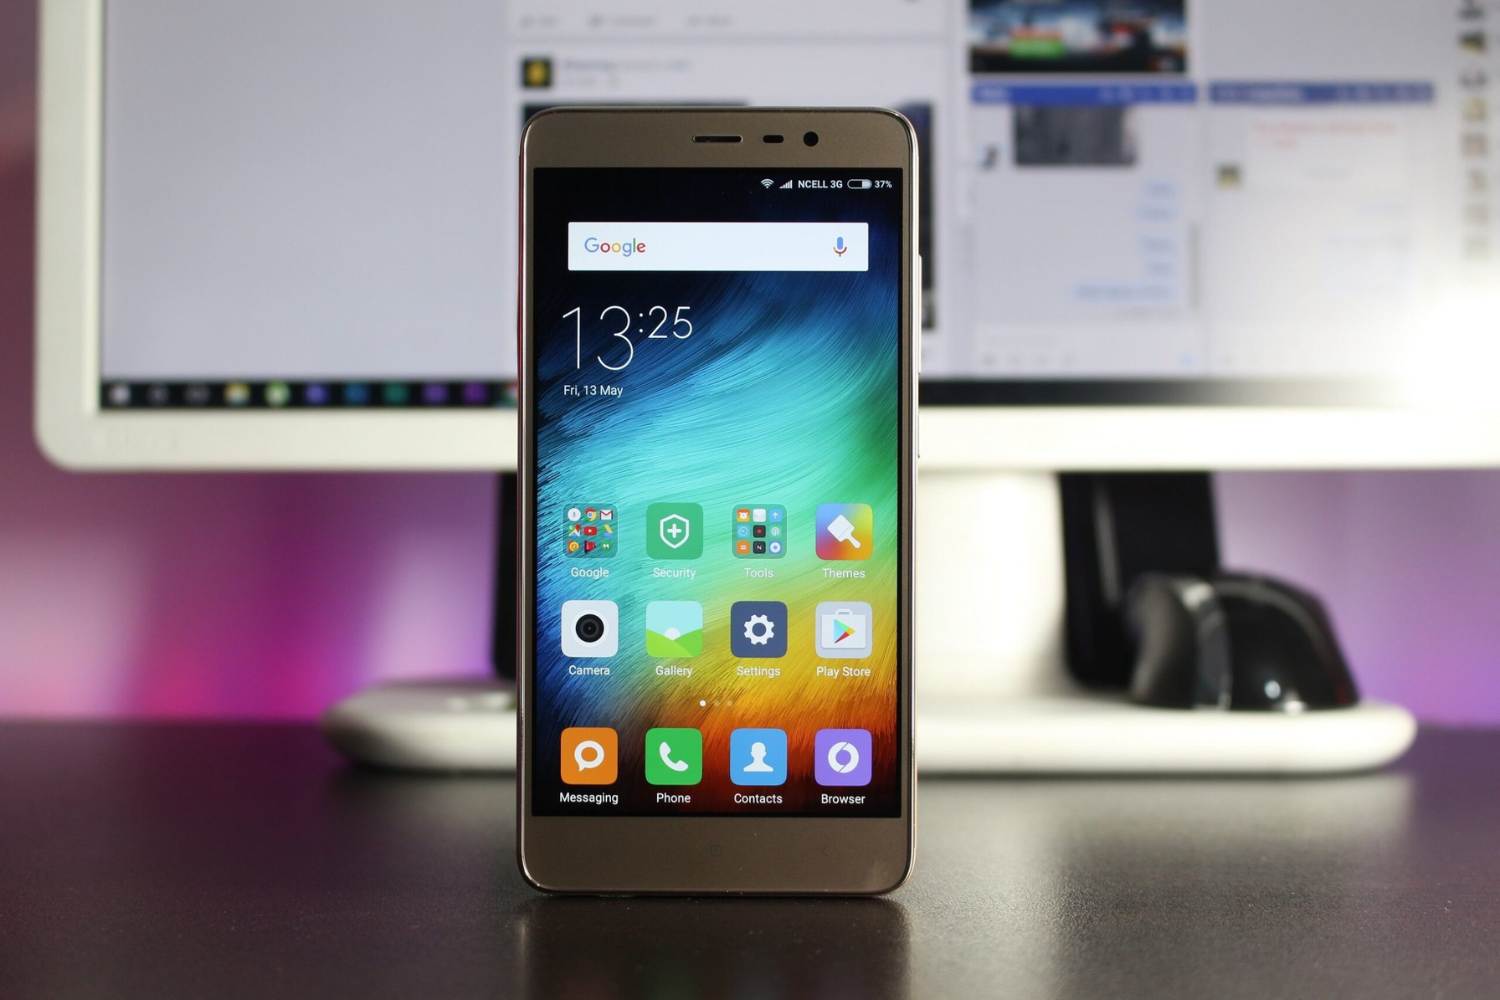 Securing Your Apps: Guide To App Lock On Redmi Note 3